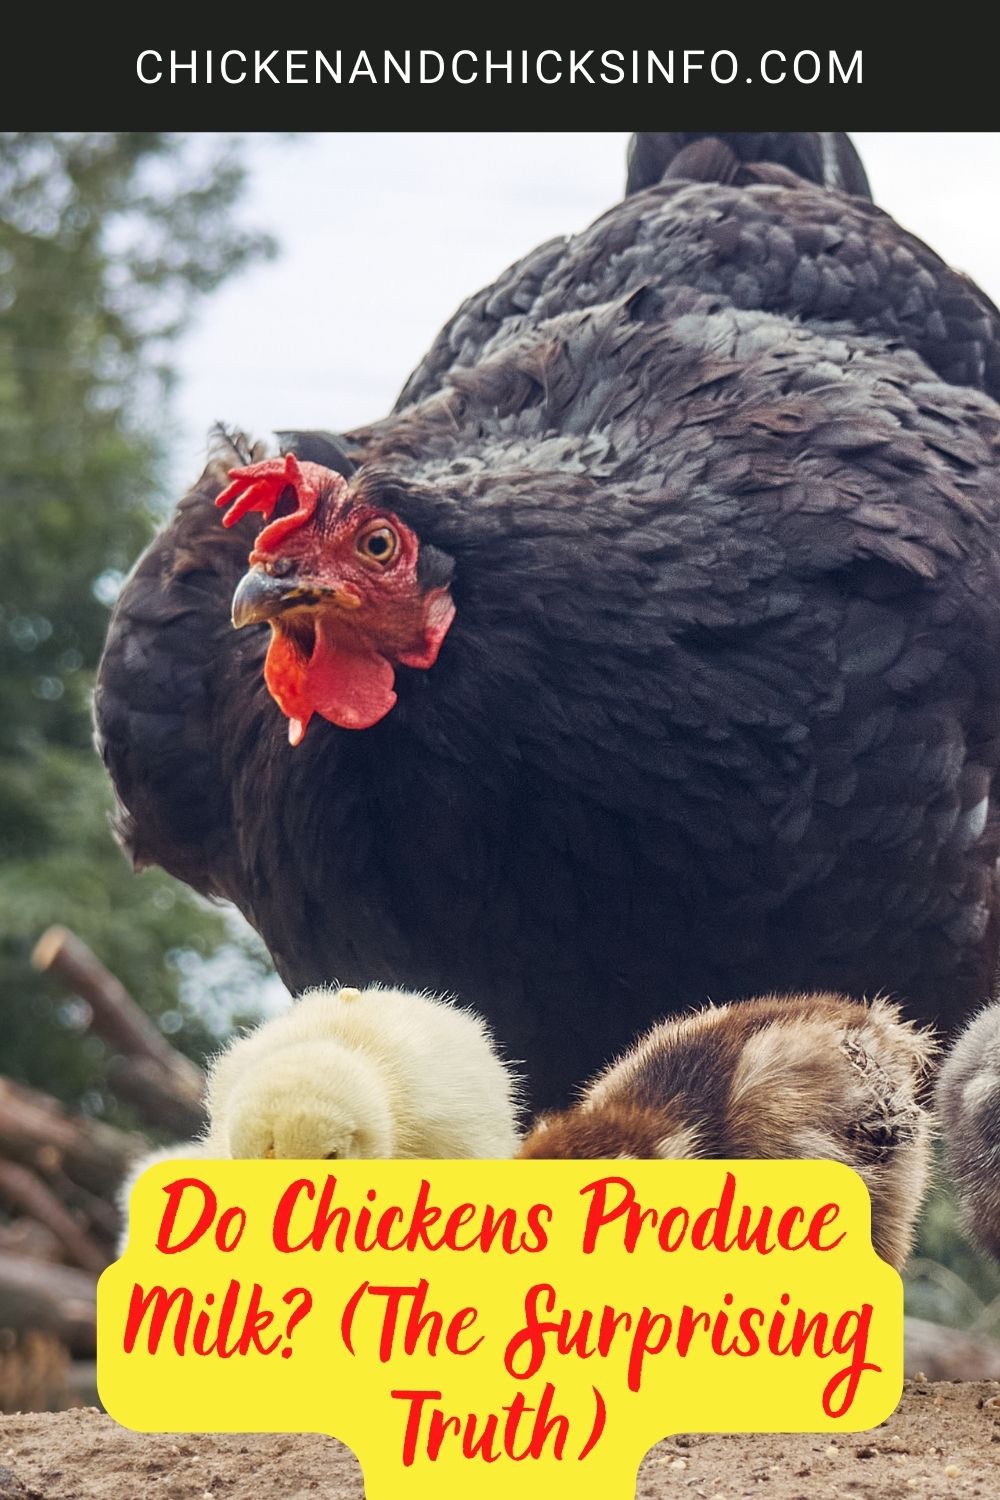 Do Chickens Produce Milk? (The Surprising Truth) poster.
